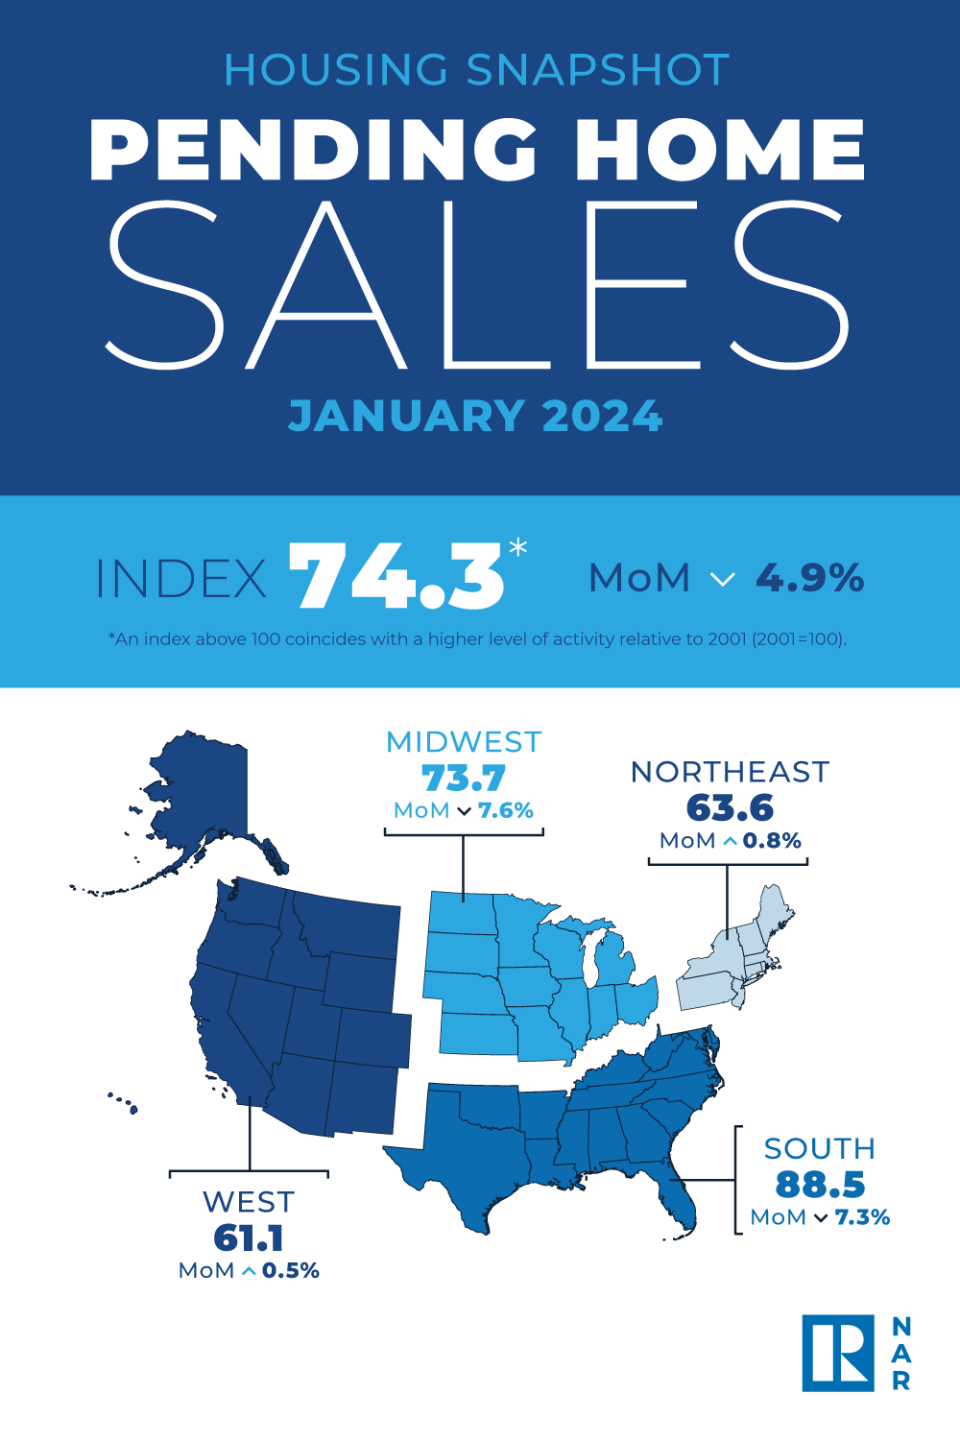 January 2024 Pending Home Sales